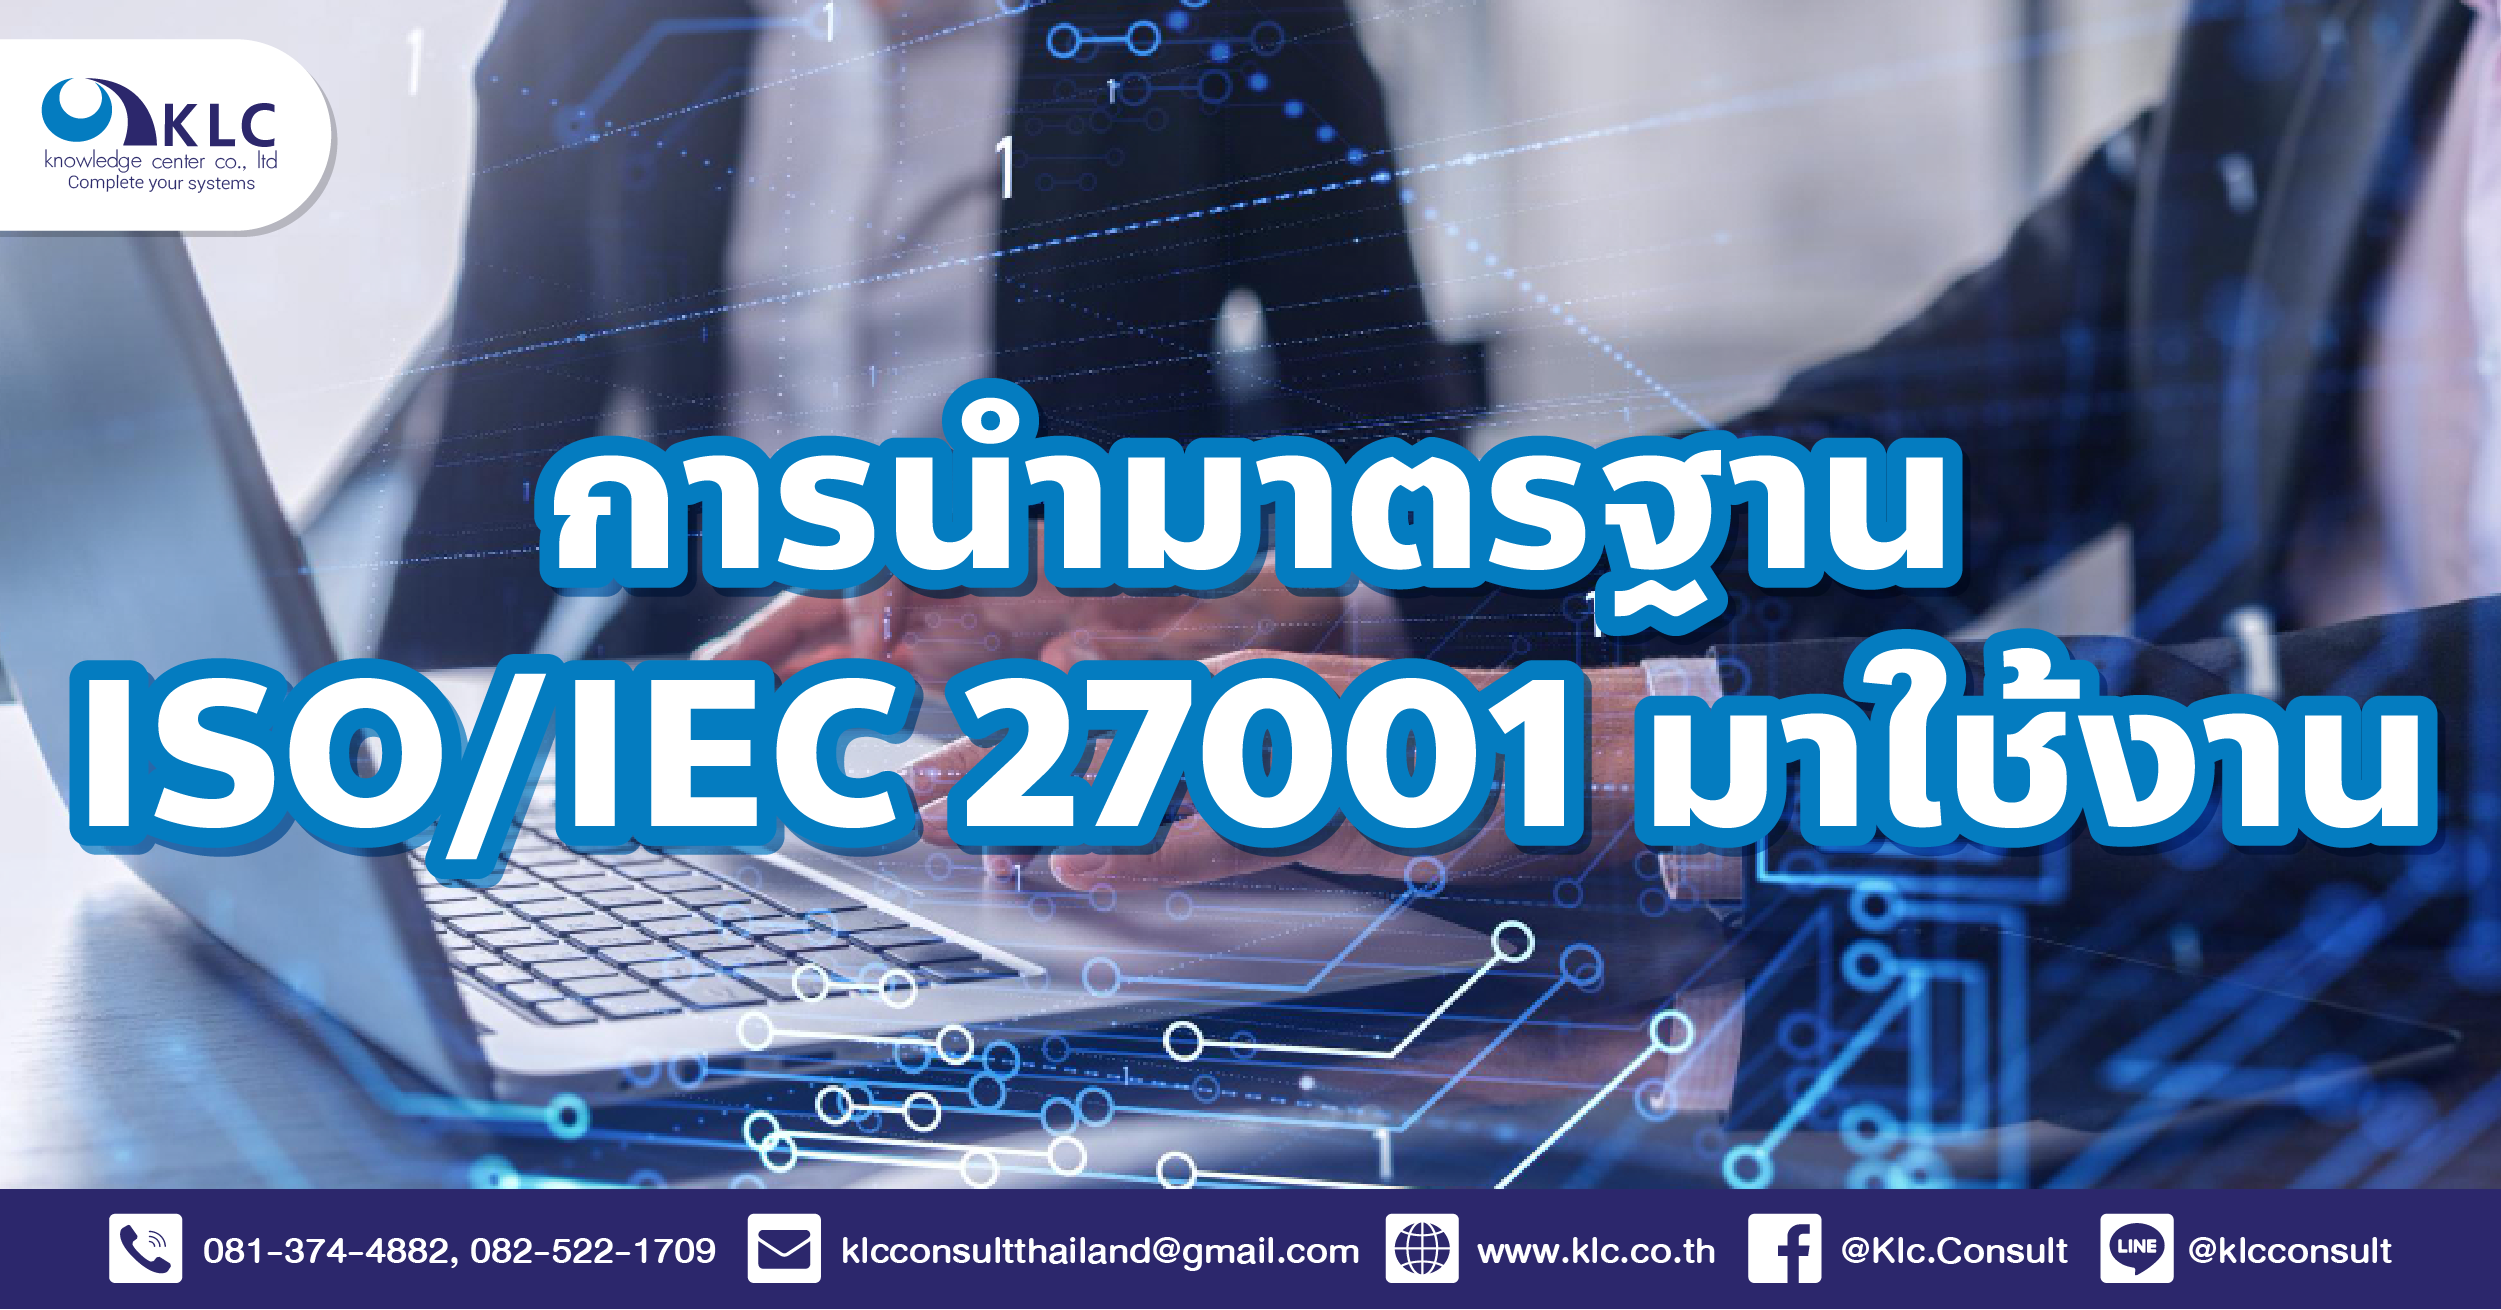 057_implementing-iso-iec-27001-standards-01